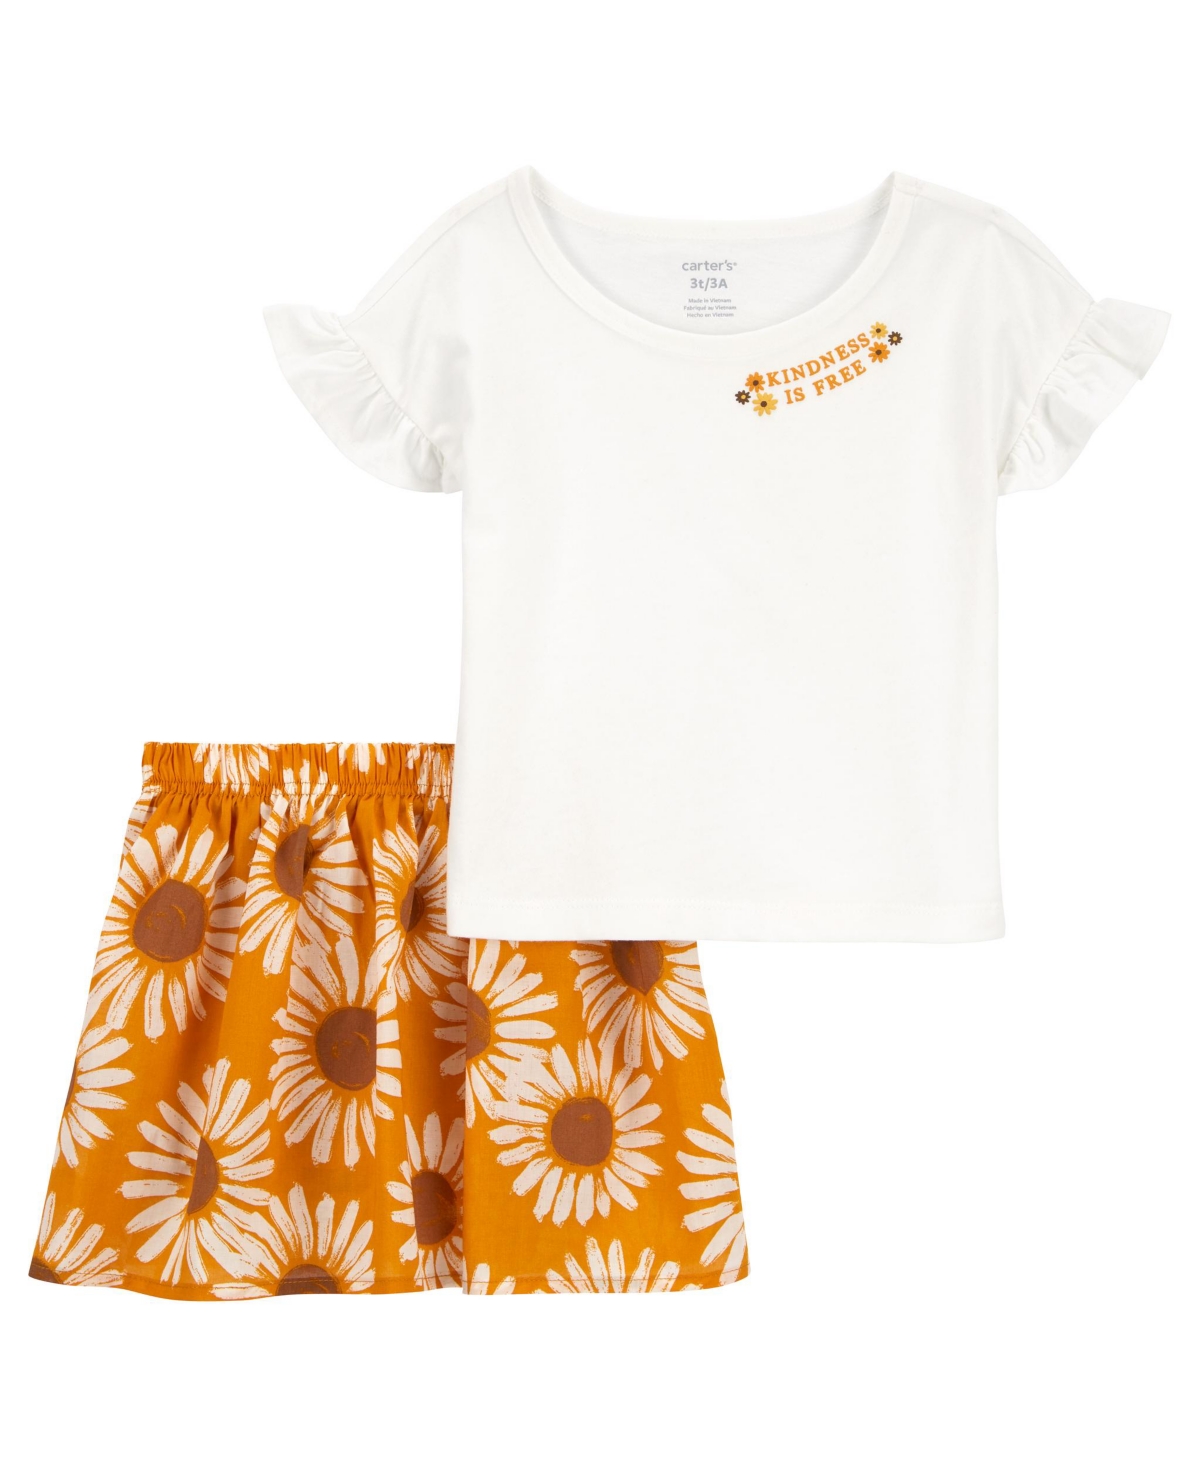 Carter's Babies' Toddler Girls Floral T-shirt And Skort, 2 Piece Set In Yellow